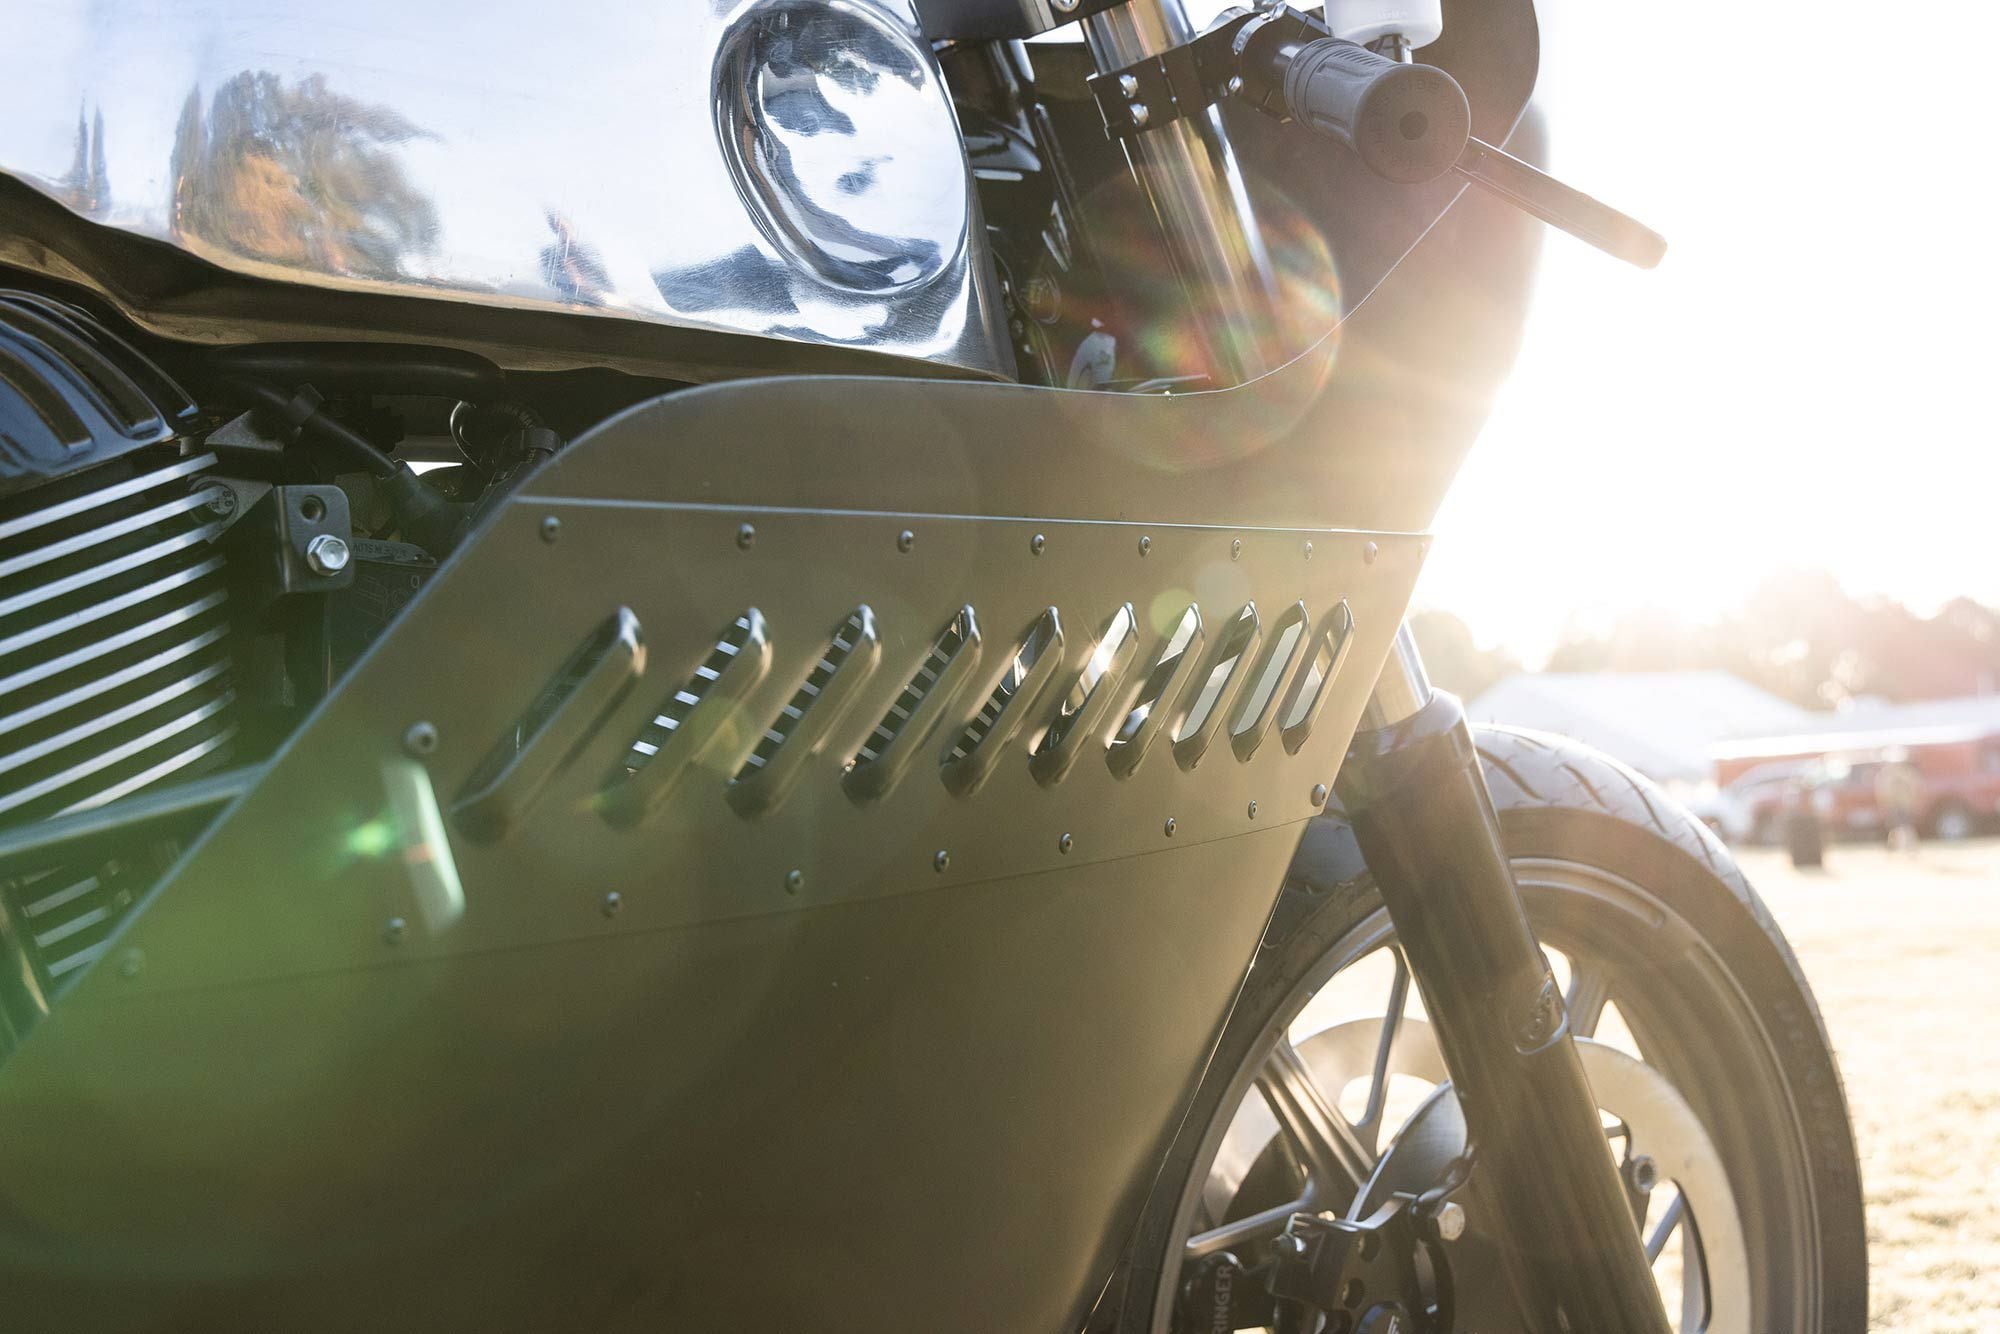 The grilles were reminiscent of the '70s fairings of the ZH x NC custom-built Indian Chief.